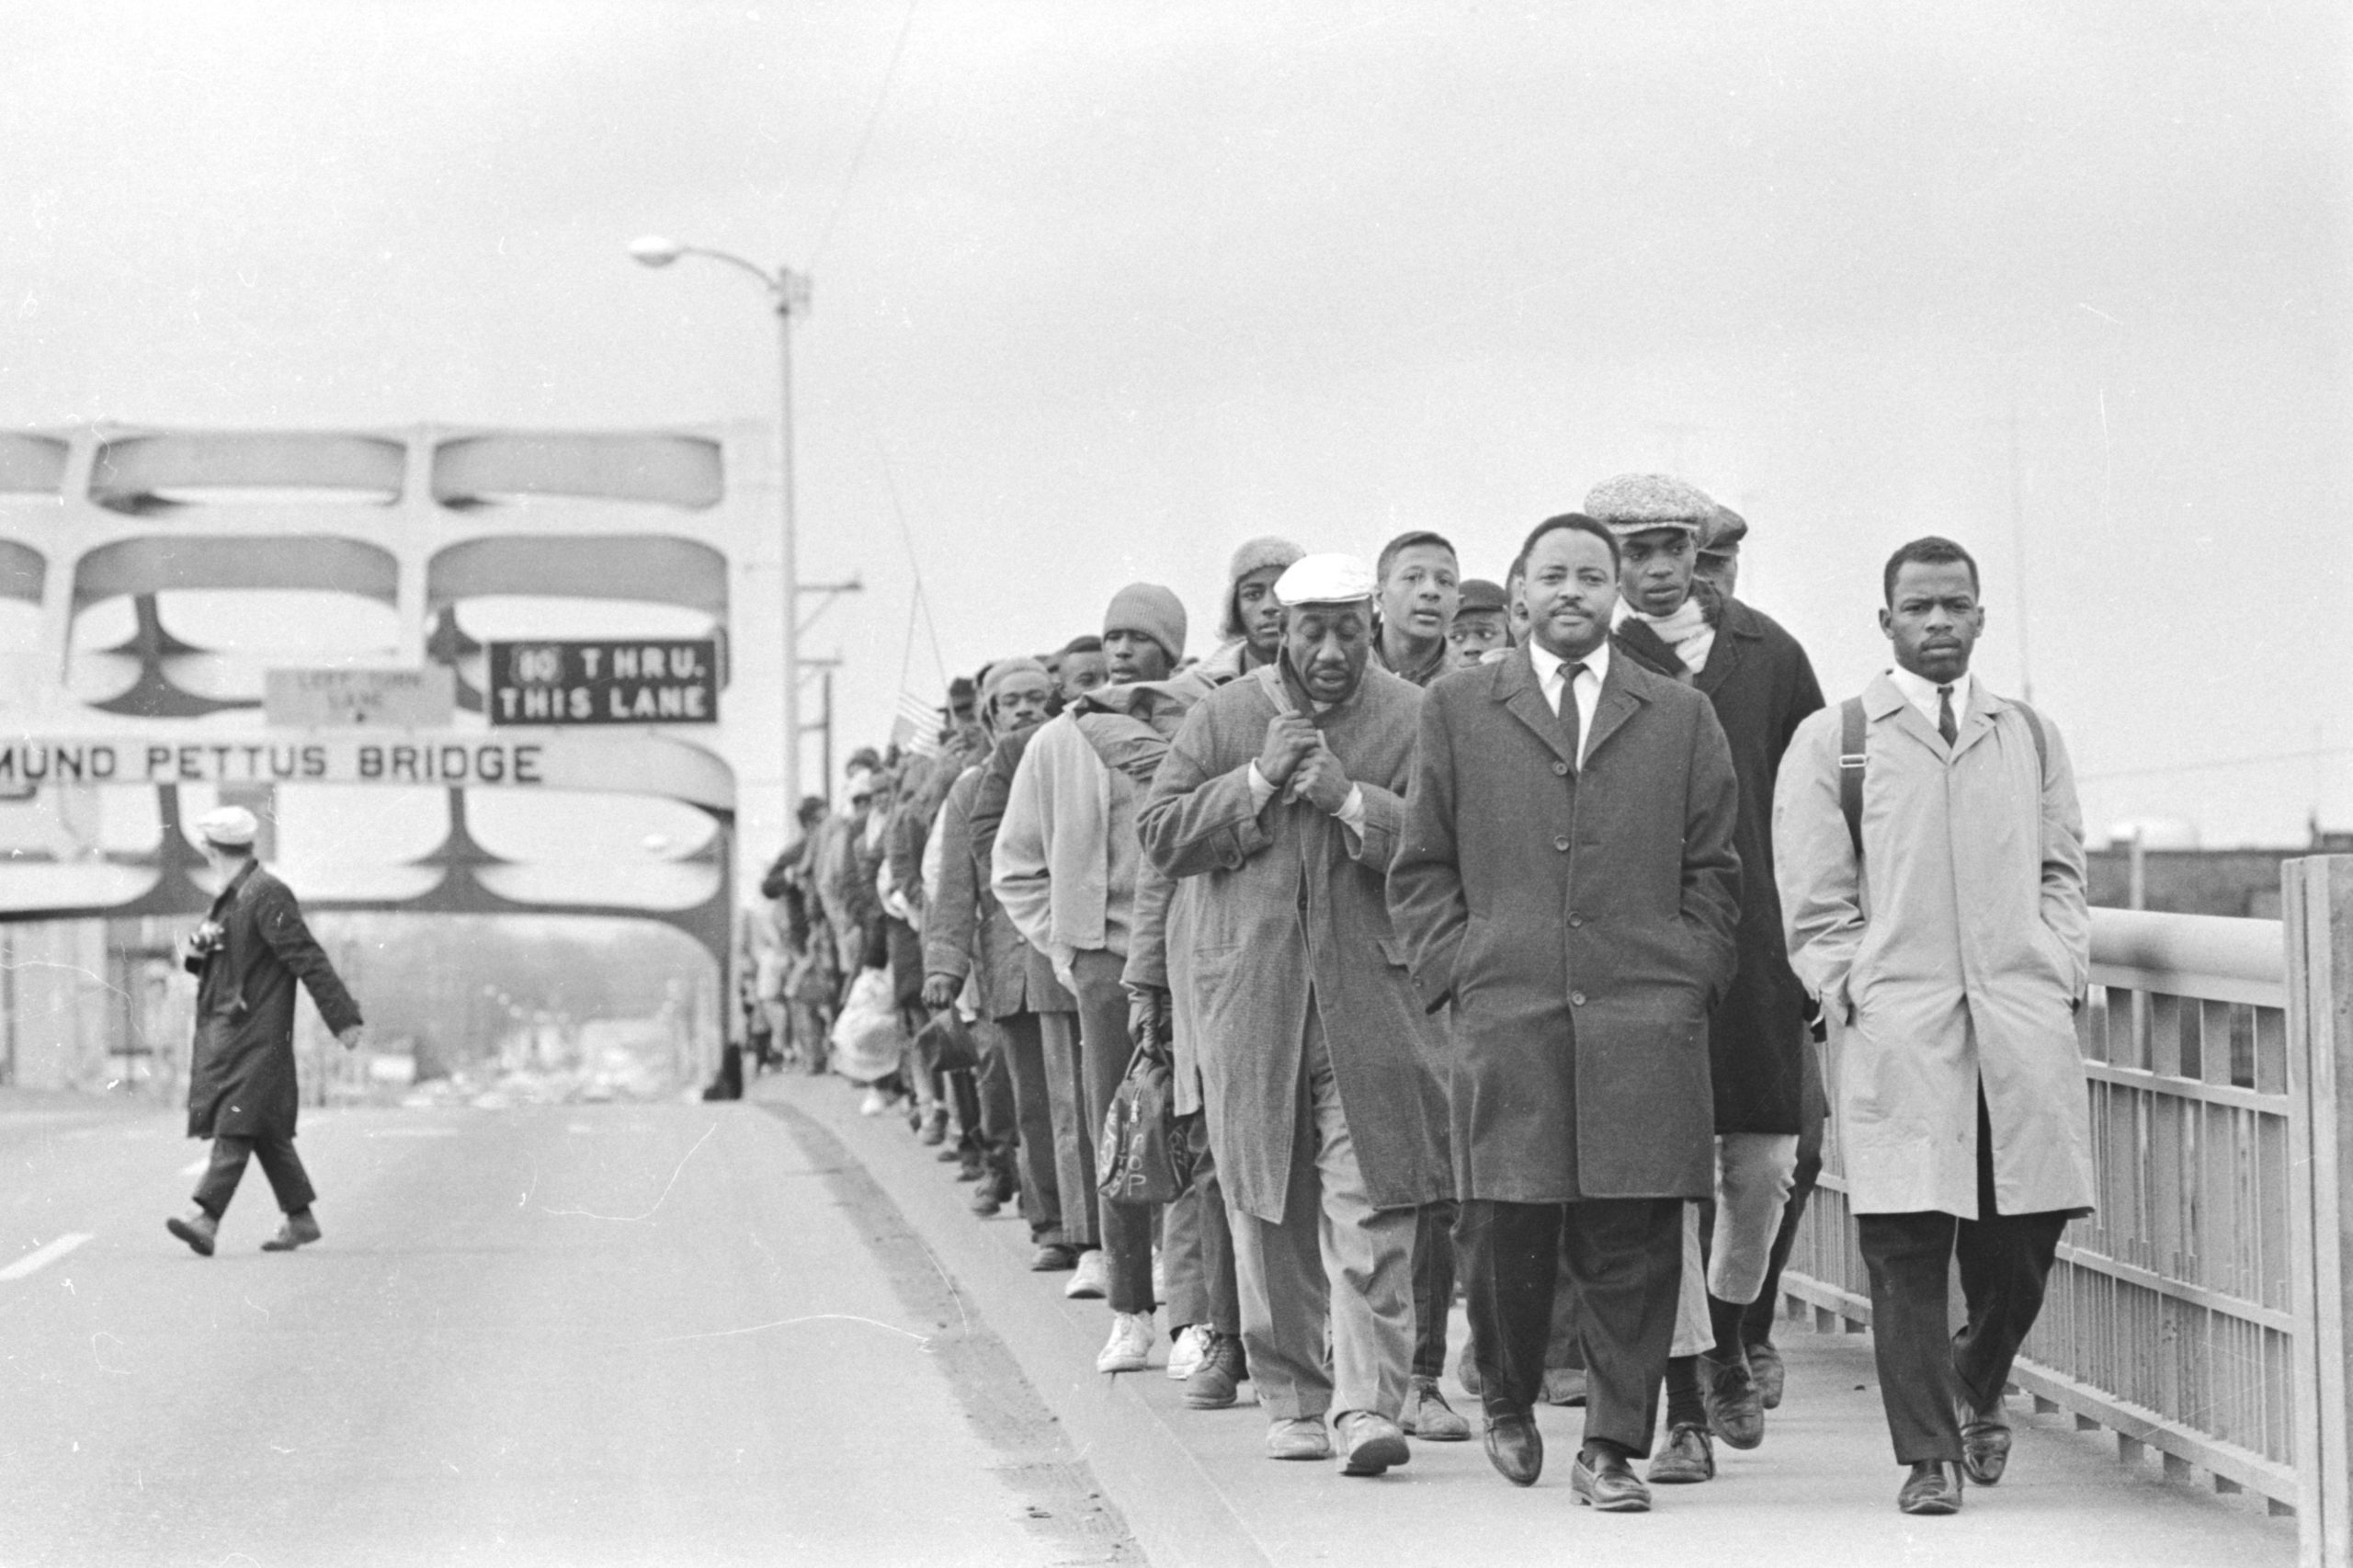 John Lewis with fellow protesters at Edmund Pettus Bridge, in “John Lewis: Good Trouble,” a Magnolia Pictures release. © Alabama Department of Archives and History. Donated by Alabama Media Group. Photo by Tom Lankford, Birmingham News.